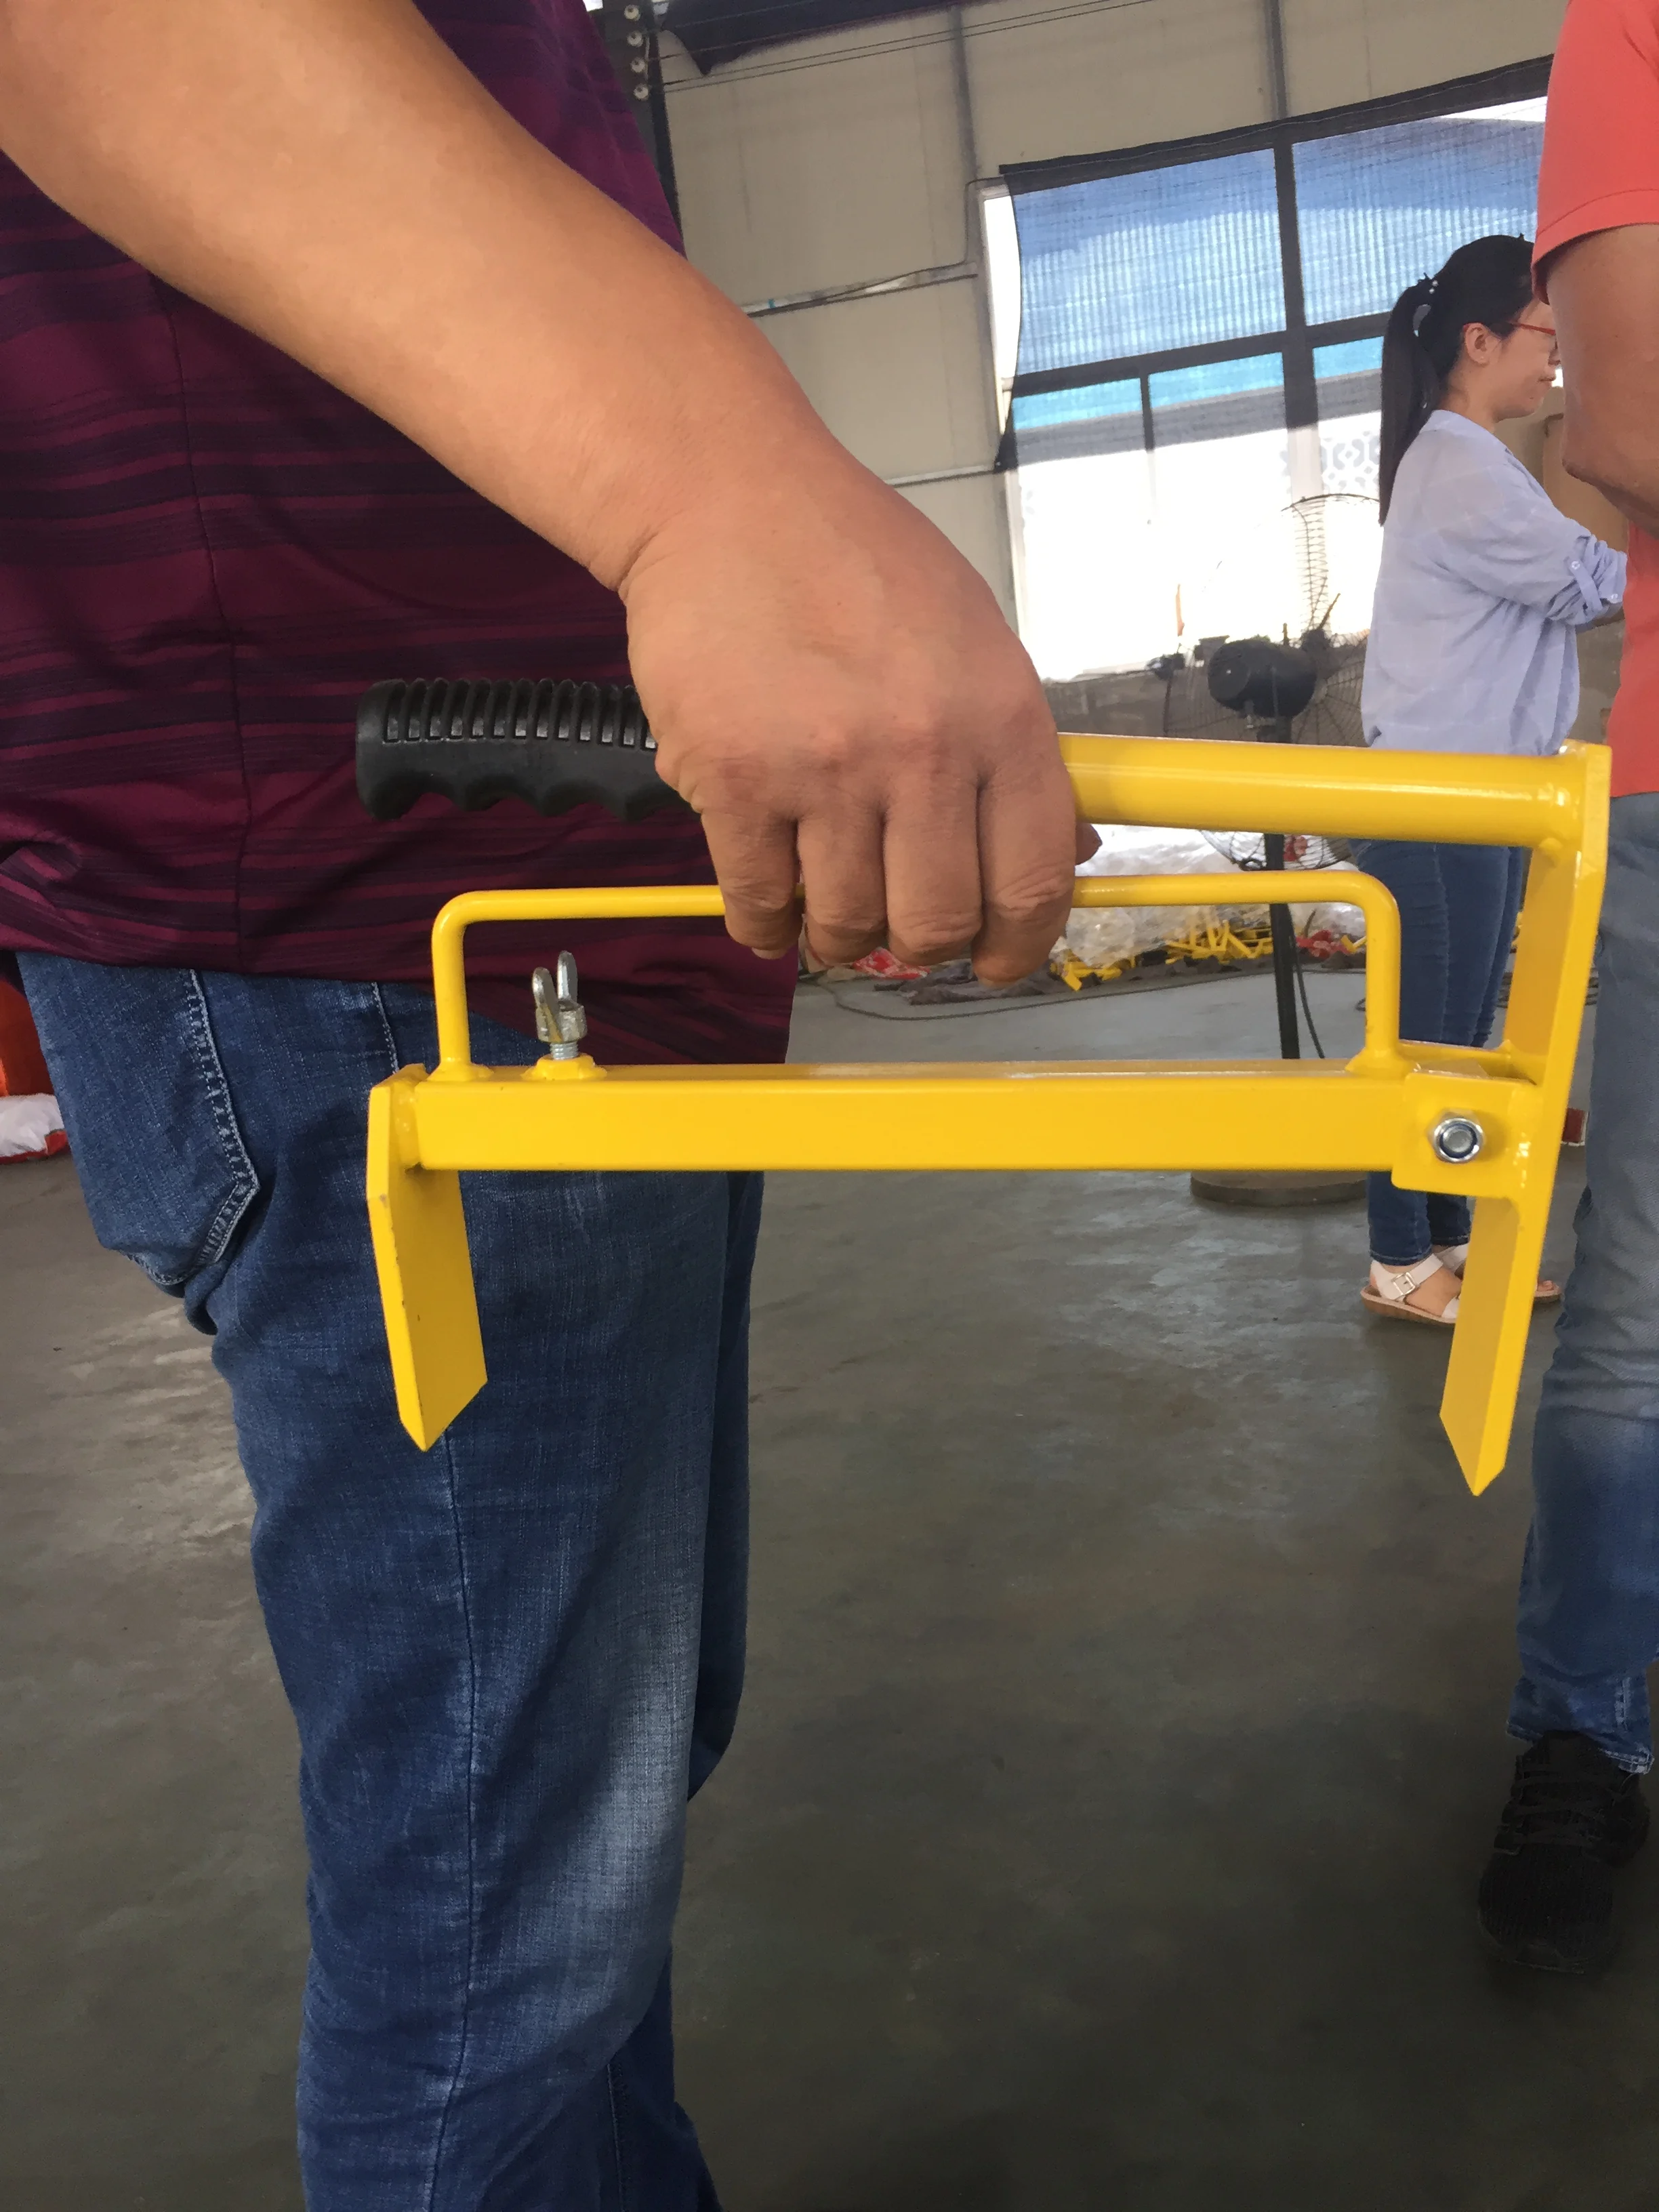 Brick Tongs Lifter Stone Lifting Clamps For Sale - Buy Brick Tongs,Brick  Lifter,Stone Lifting Clamps For Sale Product on Alibaba.com